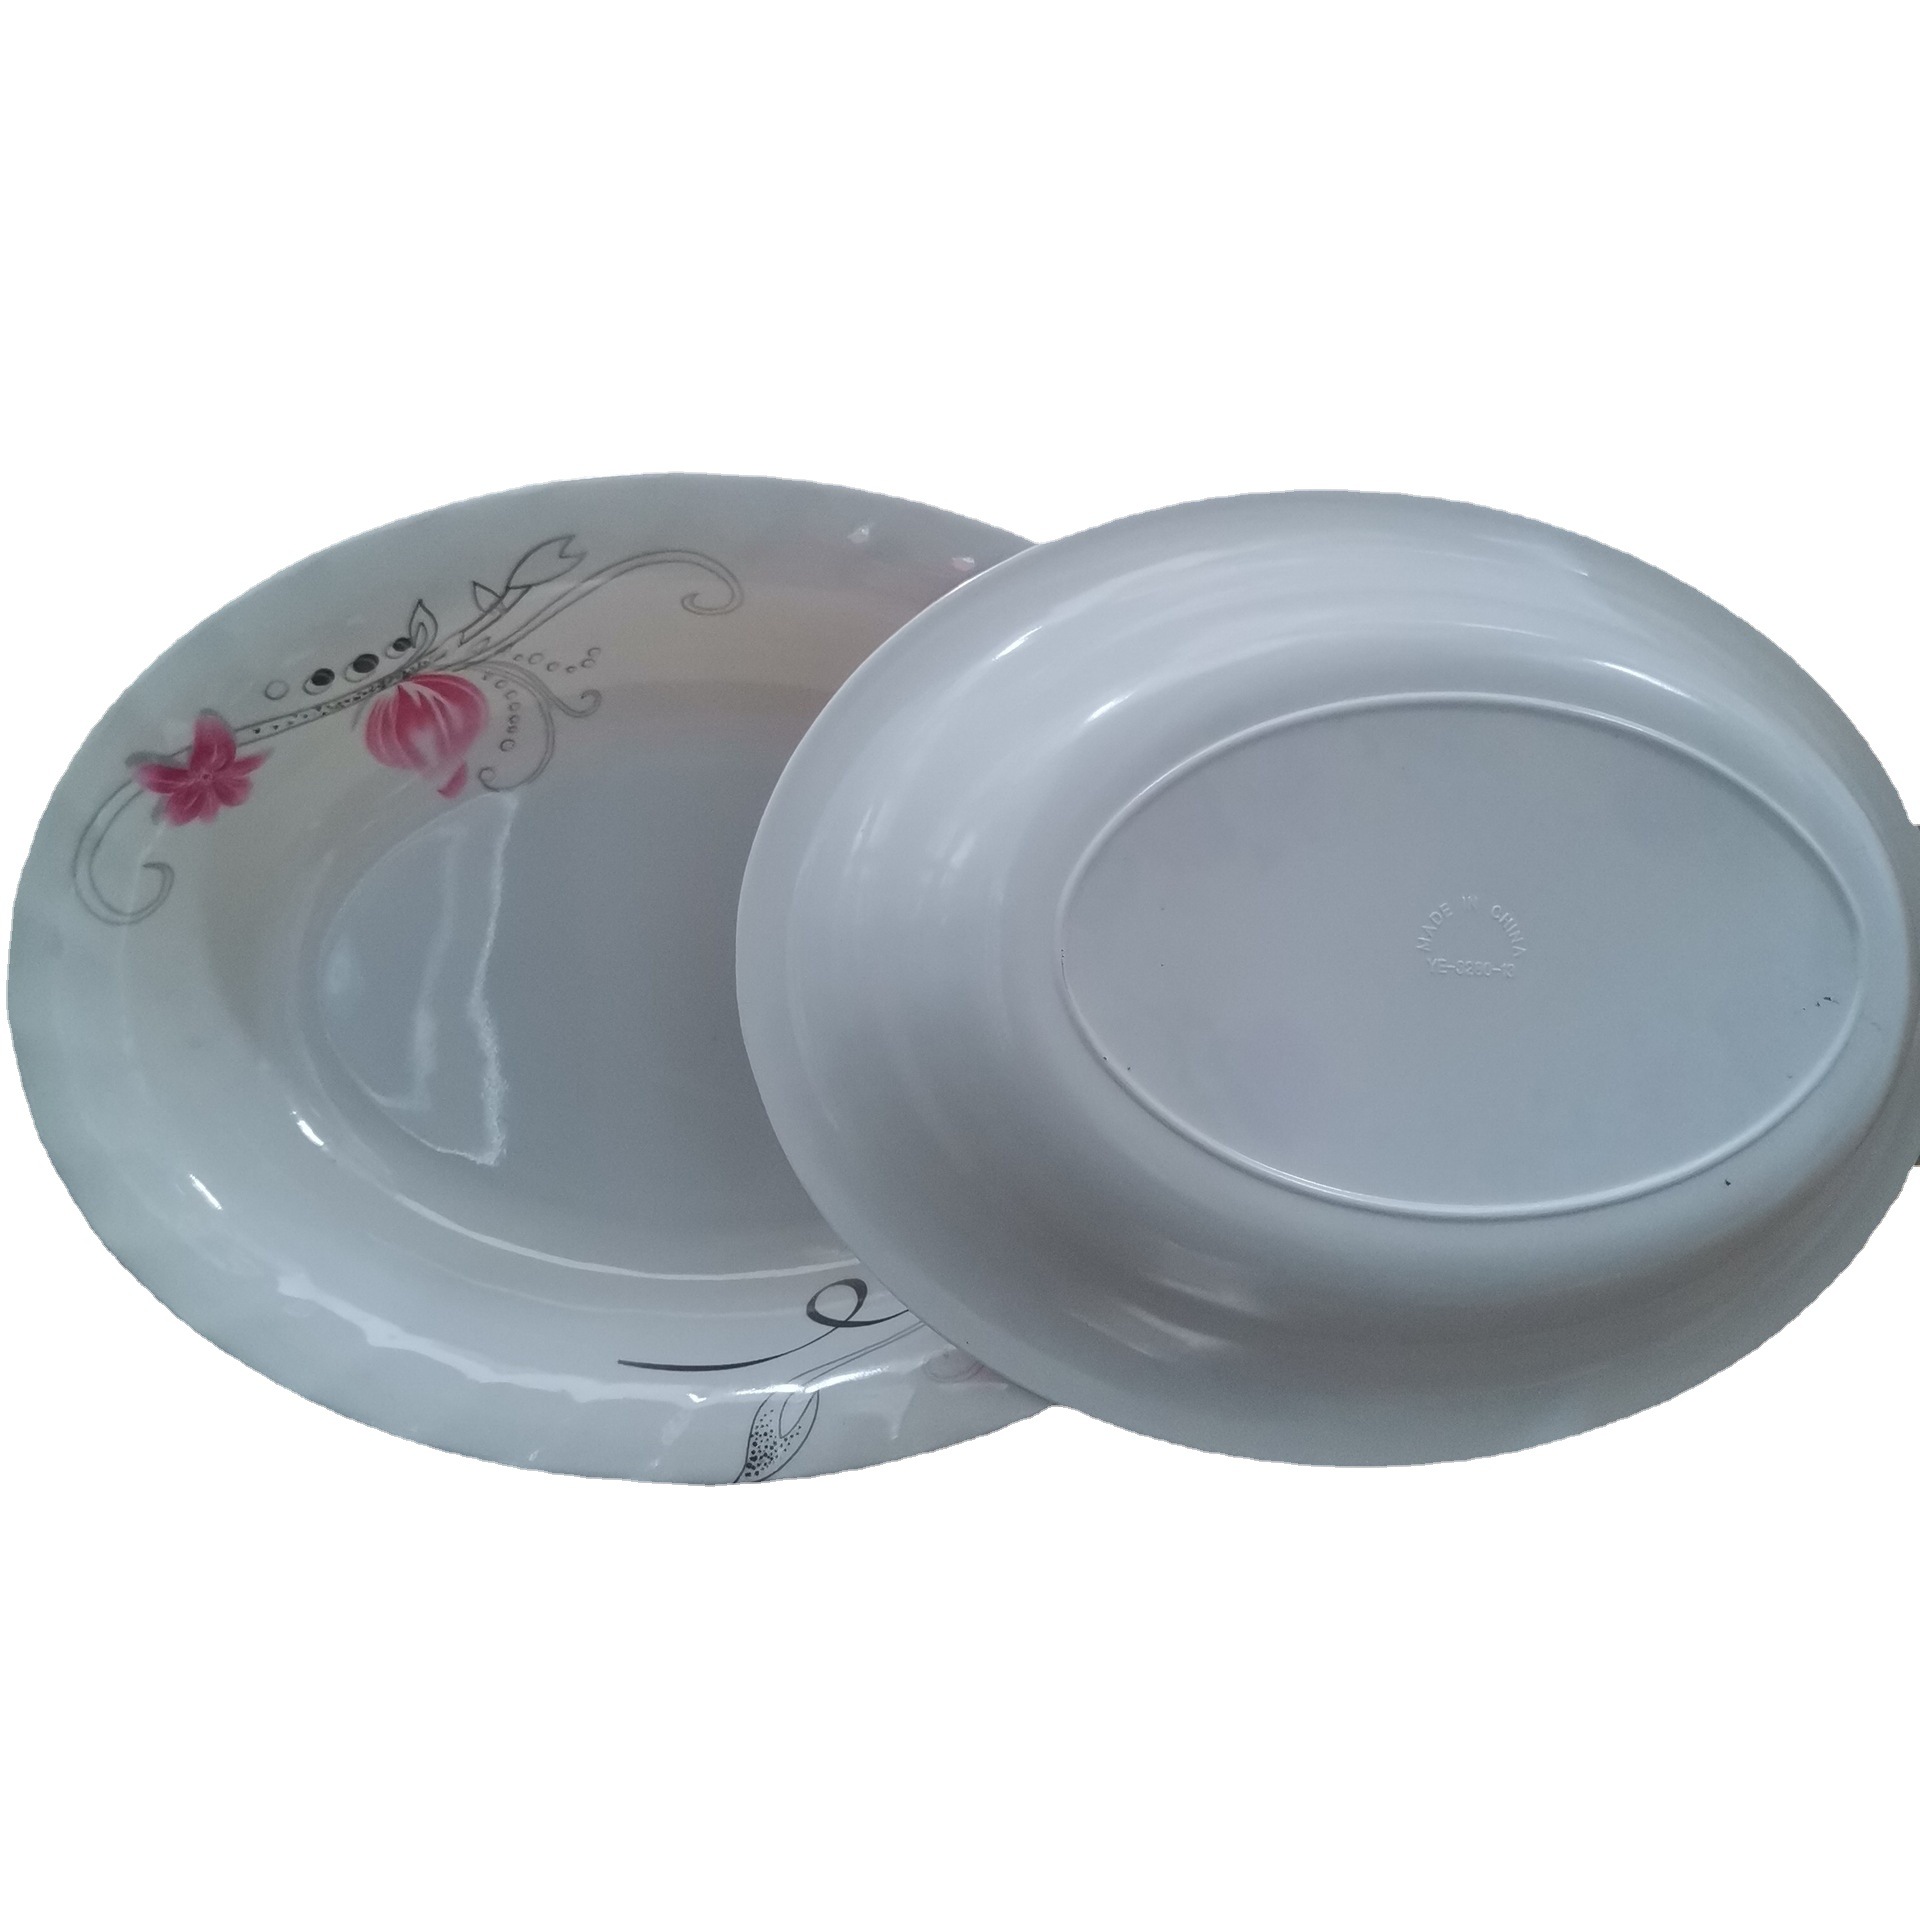 Yiwu Factory Exported to Iraq Middle East 13.4-Inch Oval Melamine Plastic Melamine Deep Bowl